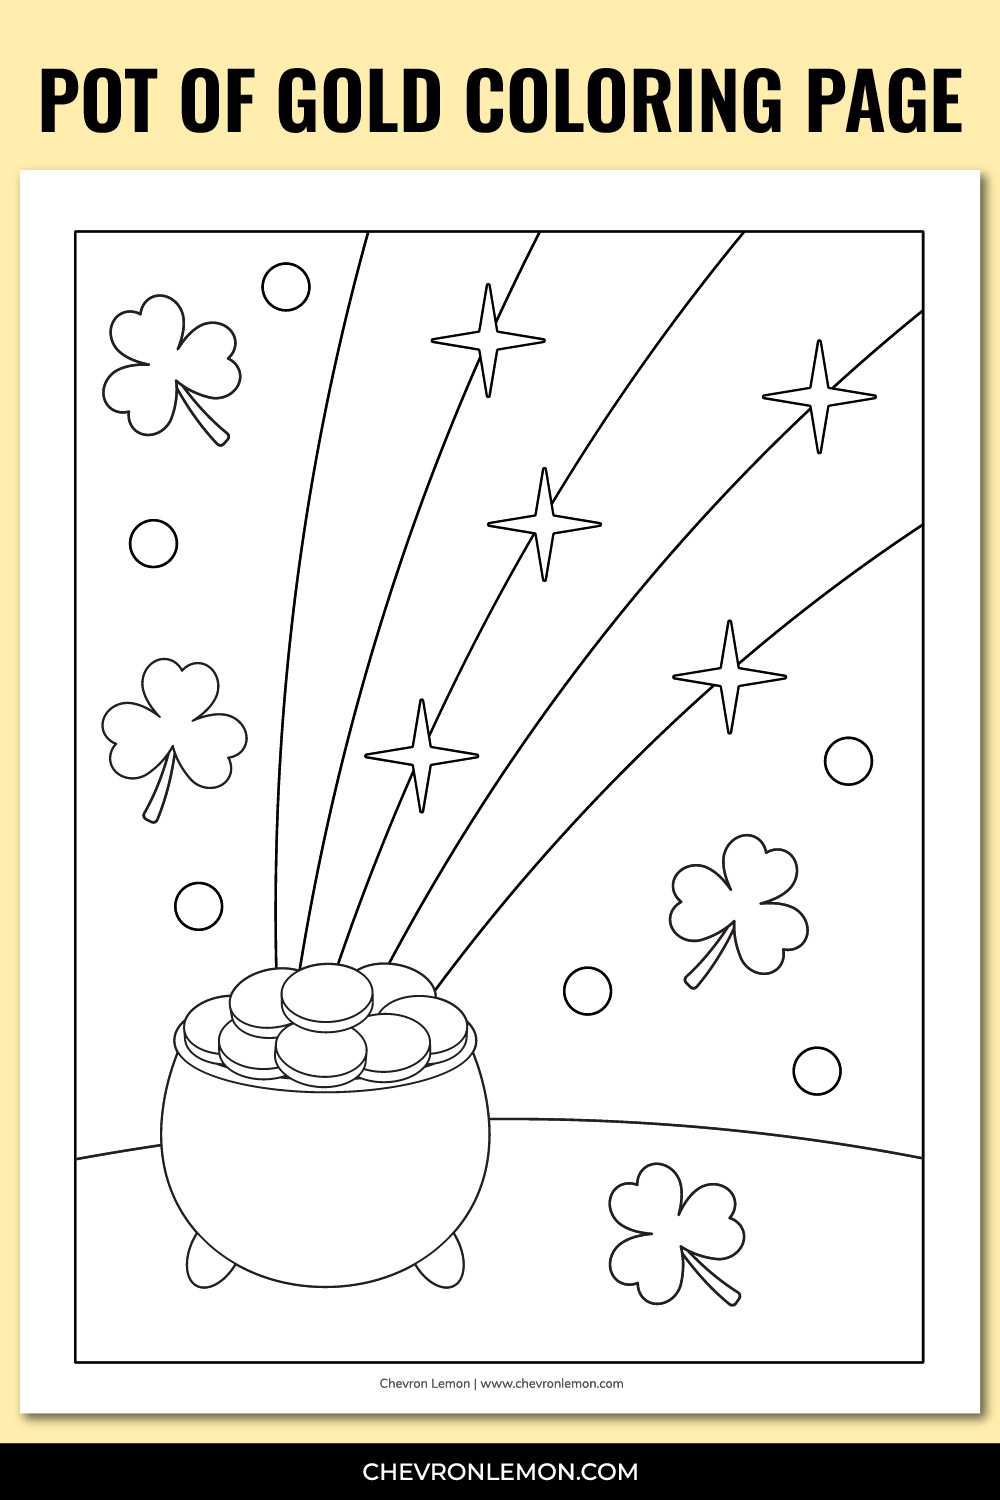 Pot of gold coloring page